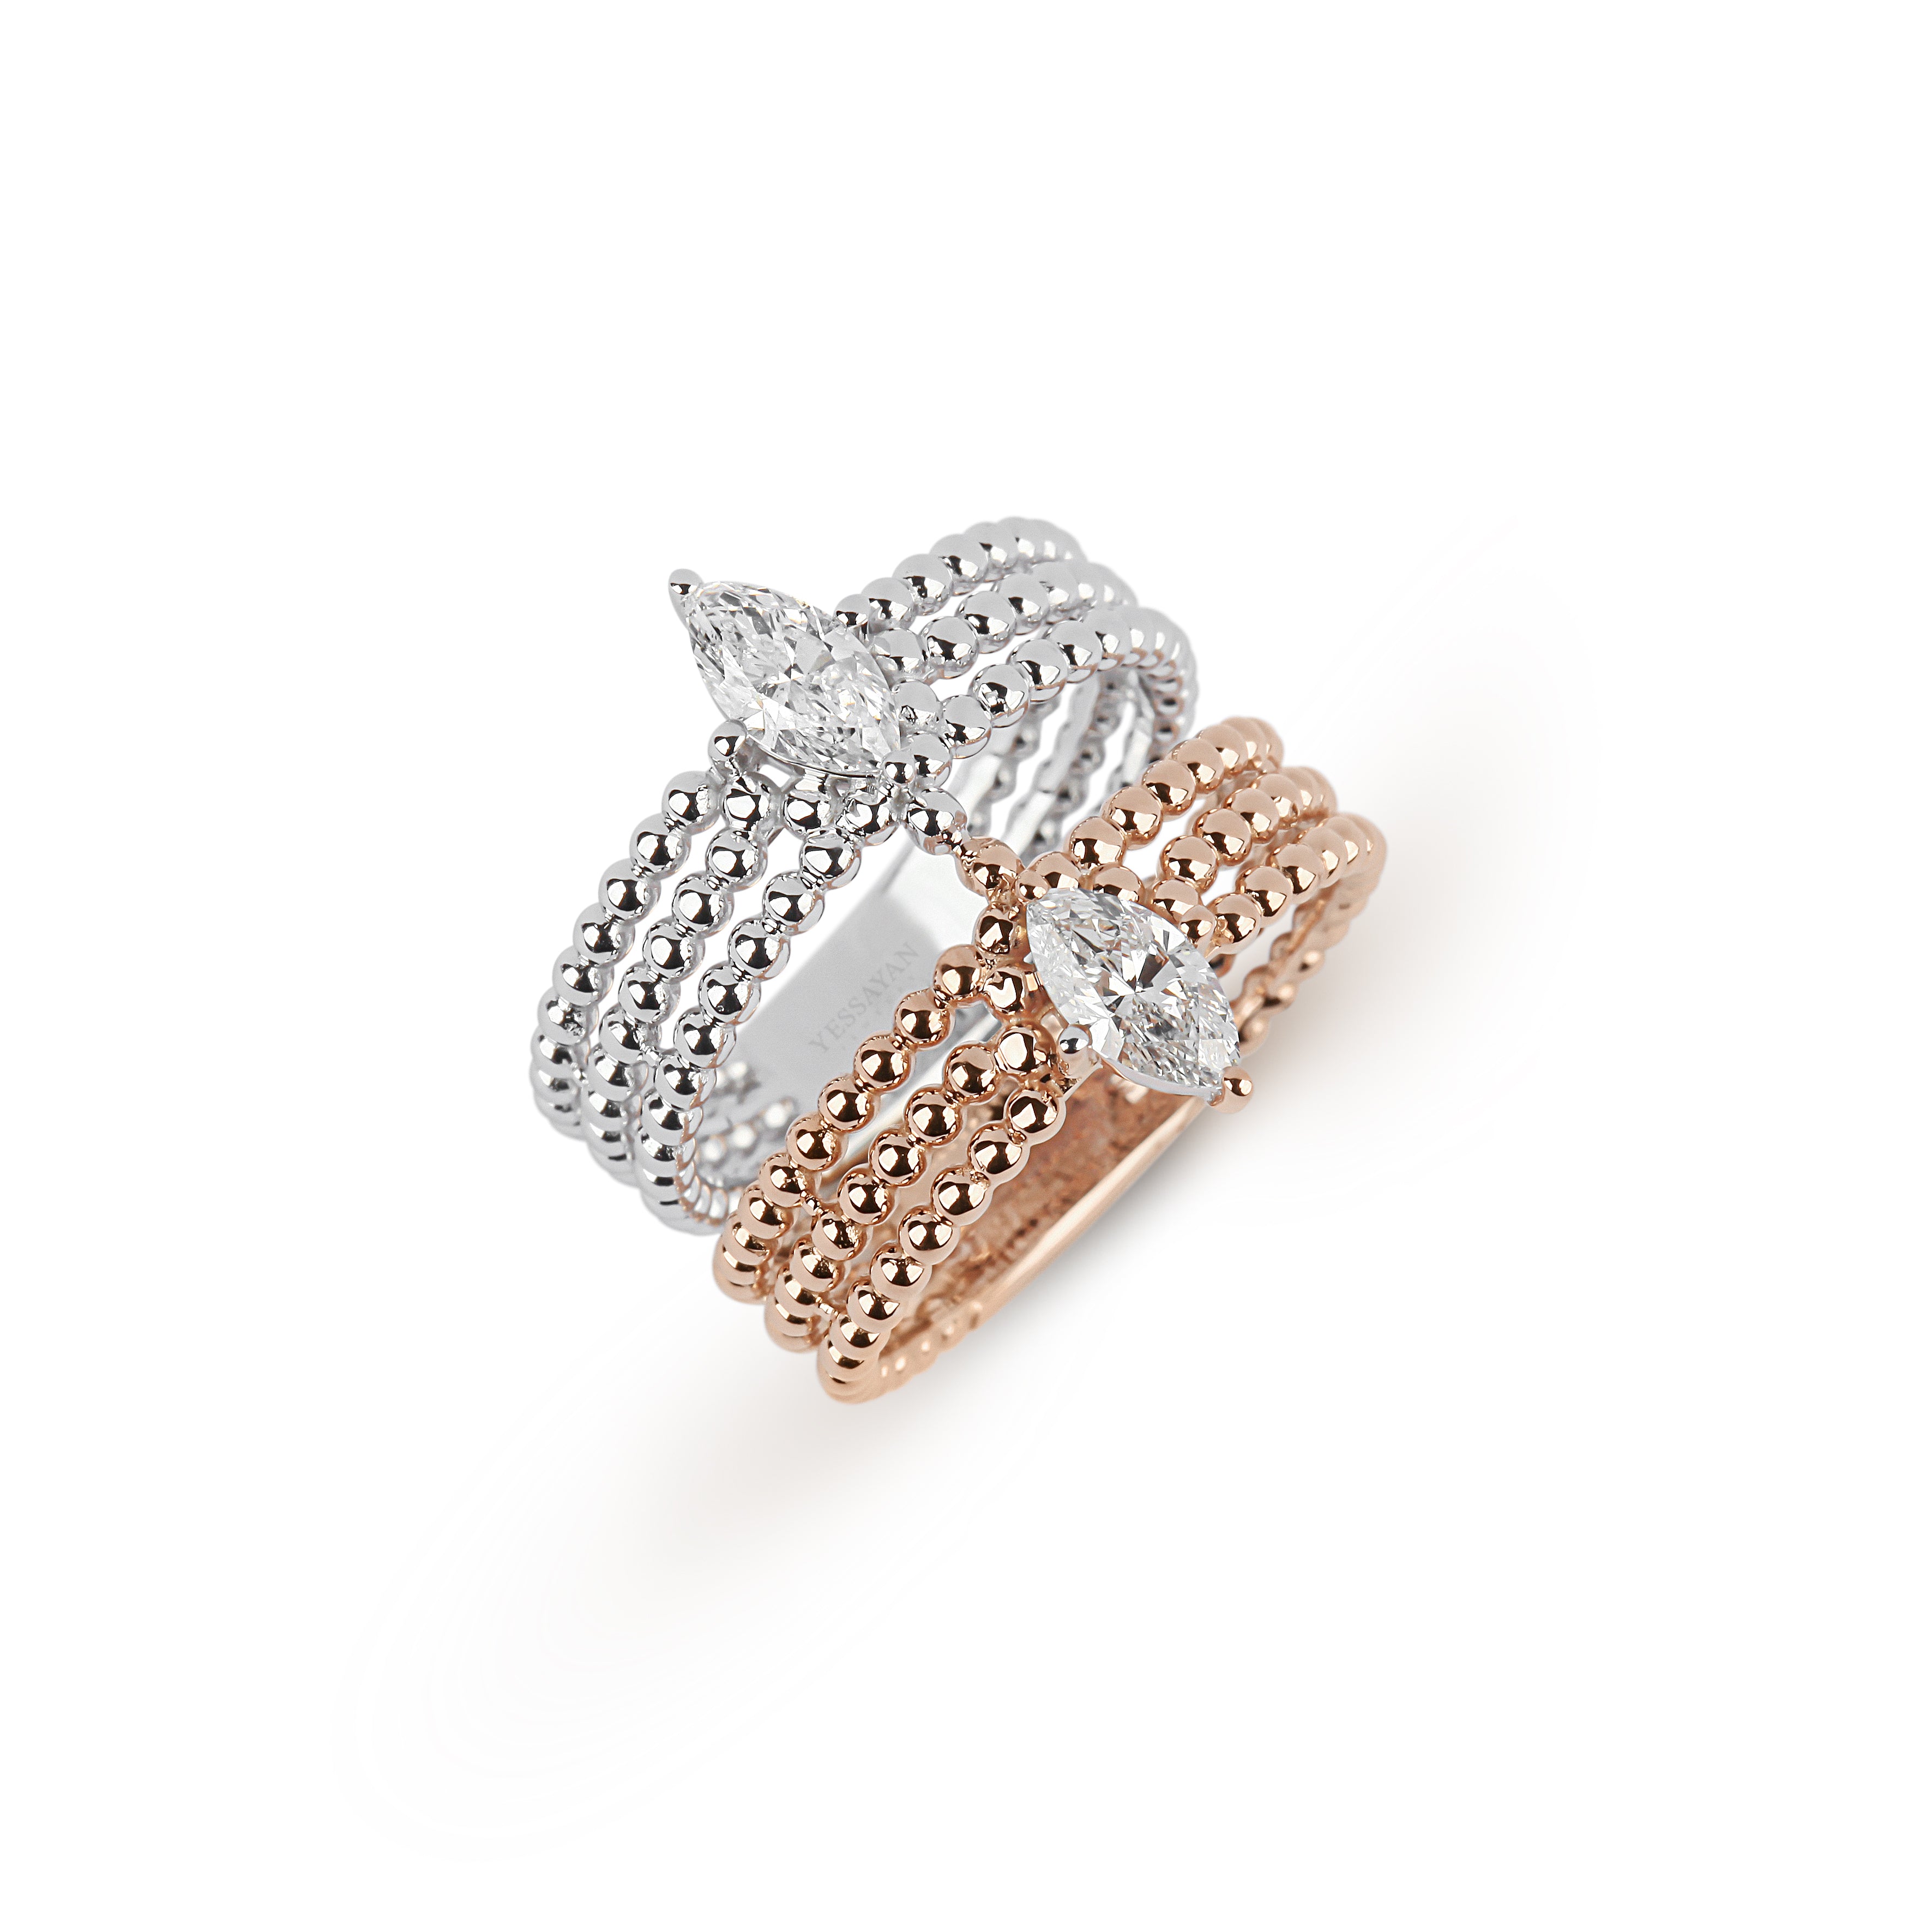 Two-Tone Stacked Diamond Ring | jewellery store | buy rings online